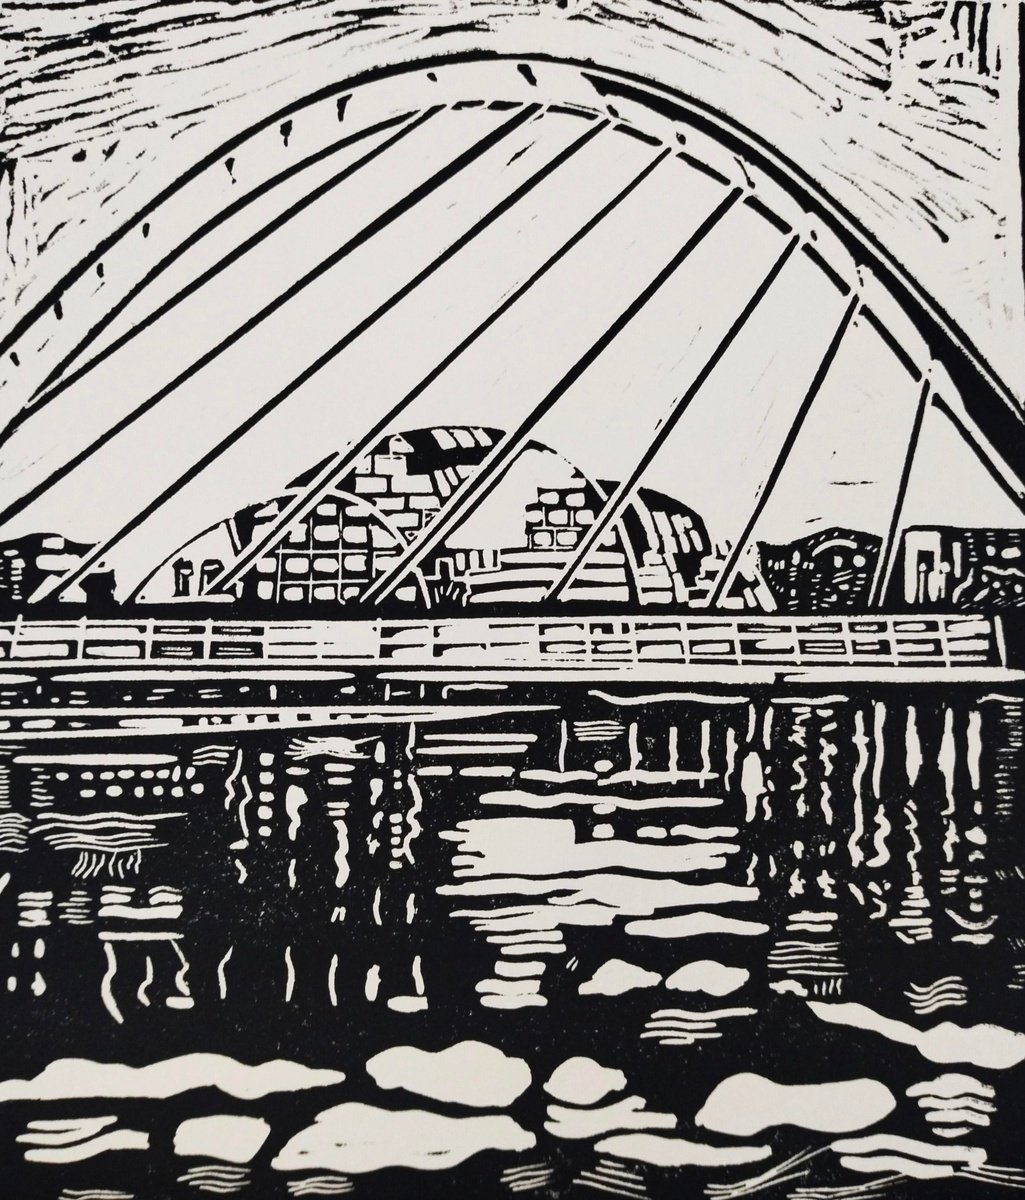 ’View of the Millennium Bridge and Sage, Gateshead’ by Mark Murphy